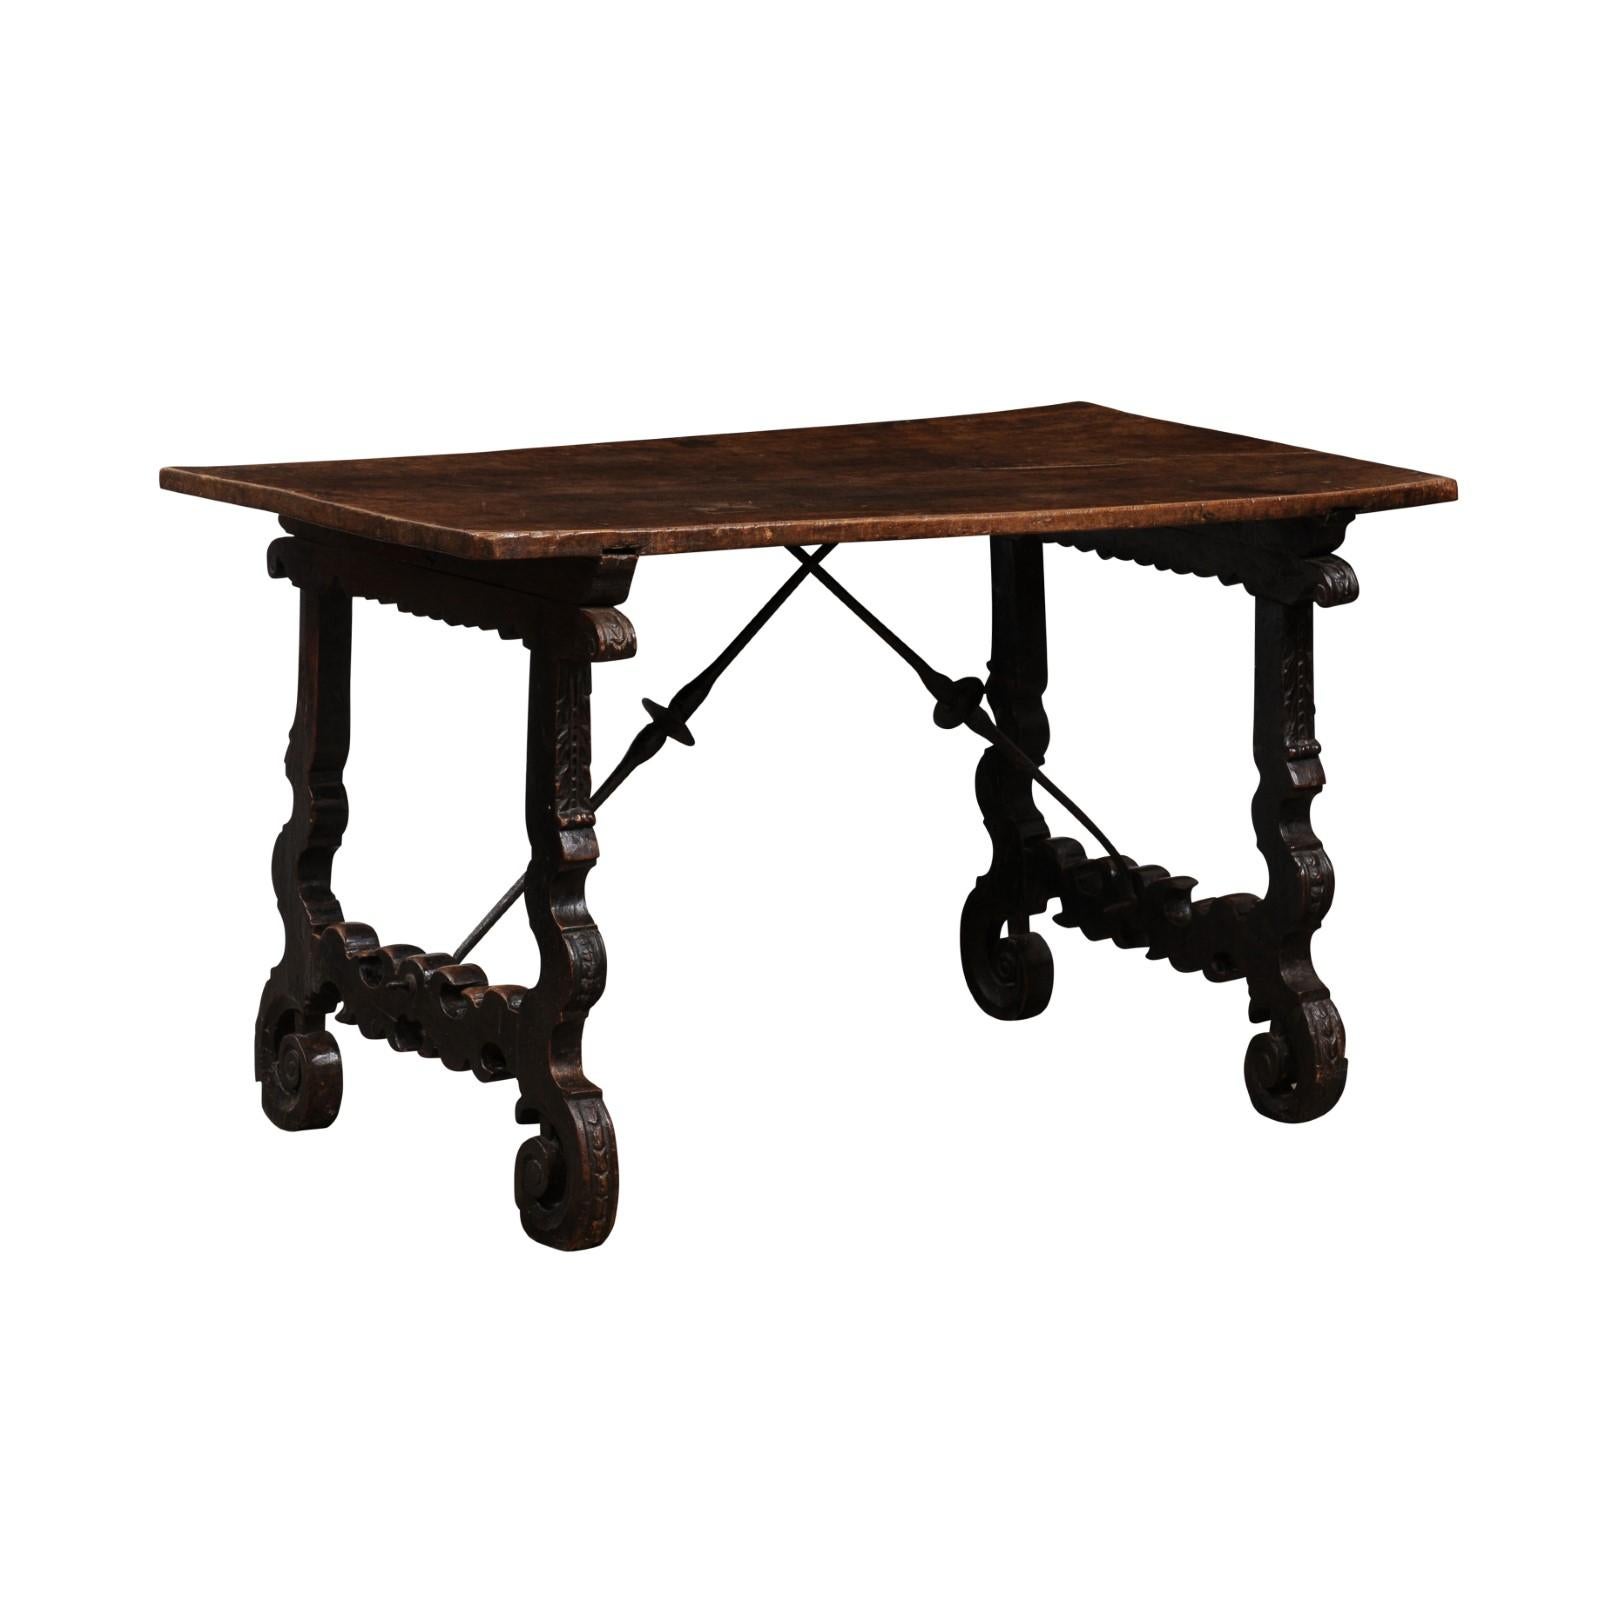 17th Century Spanish Walnut Table with Lyre Shaped Carved Legs & Iron Stretchers